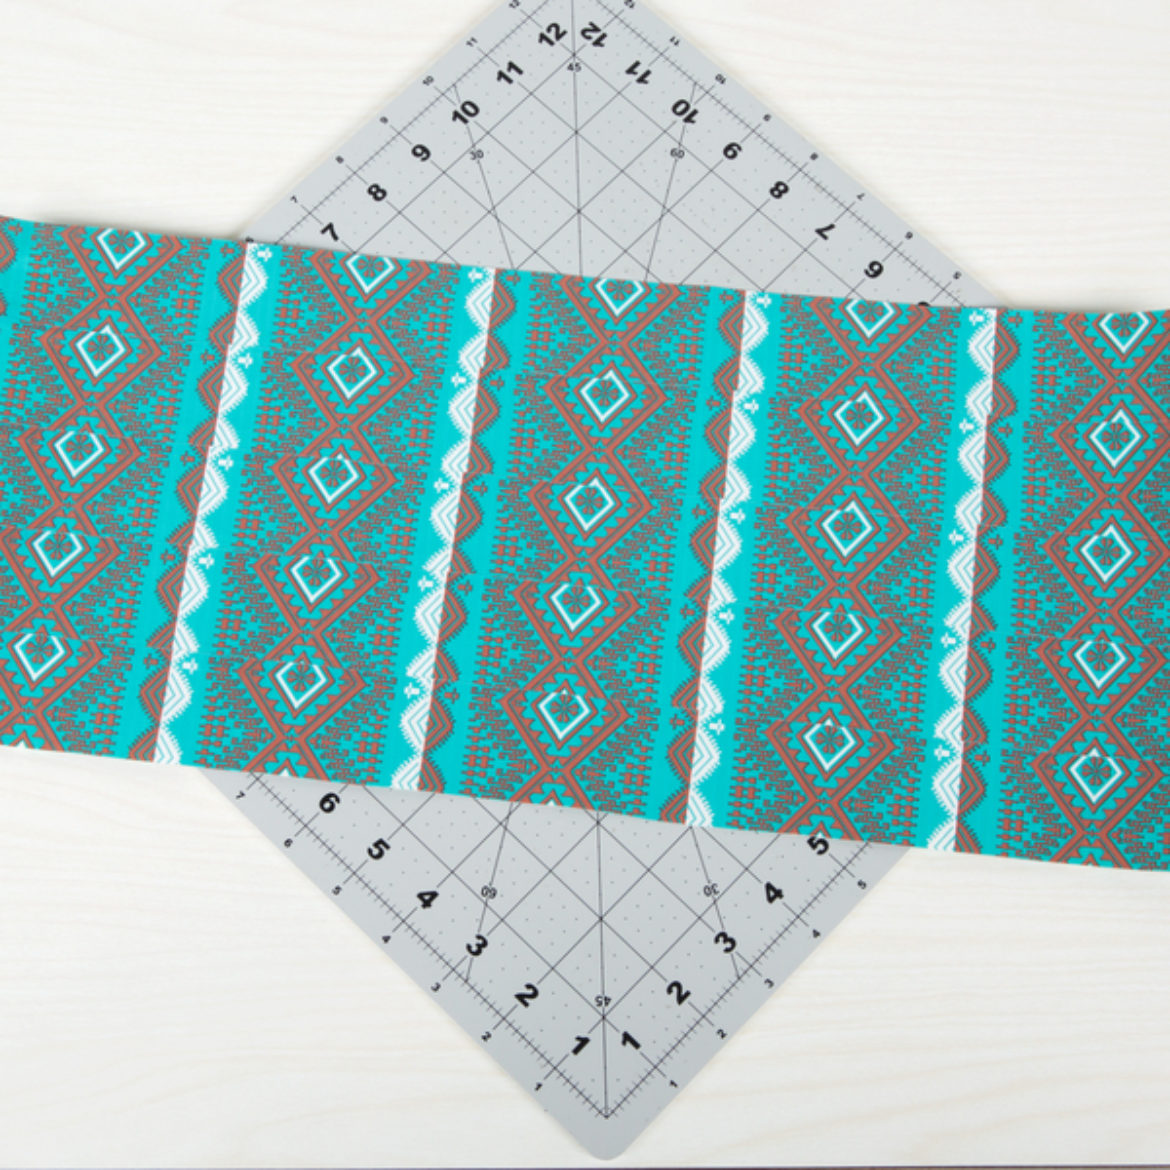 Double sided Duck Tape fabric made by overlapping strips of Duck Tape into a sheet and placing sticky side to sticky side with an identical sheet